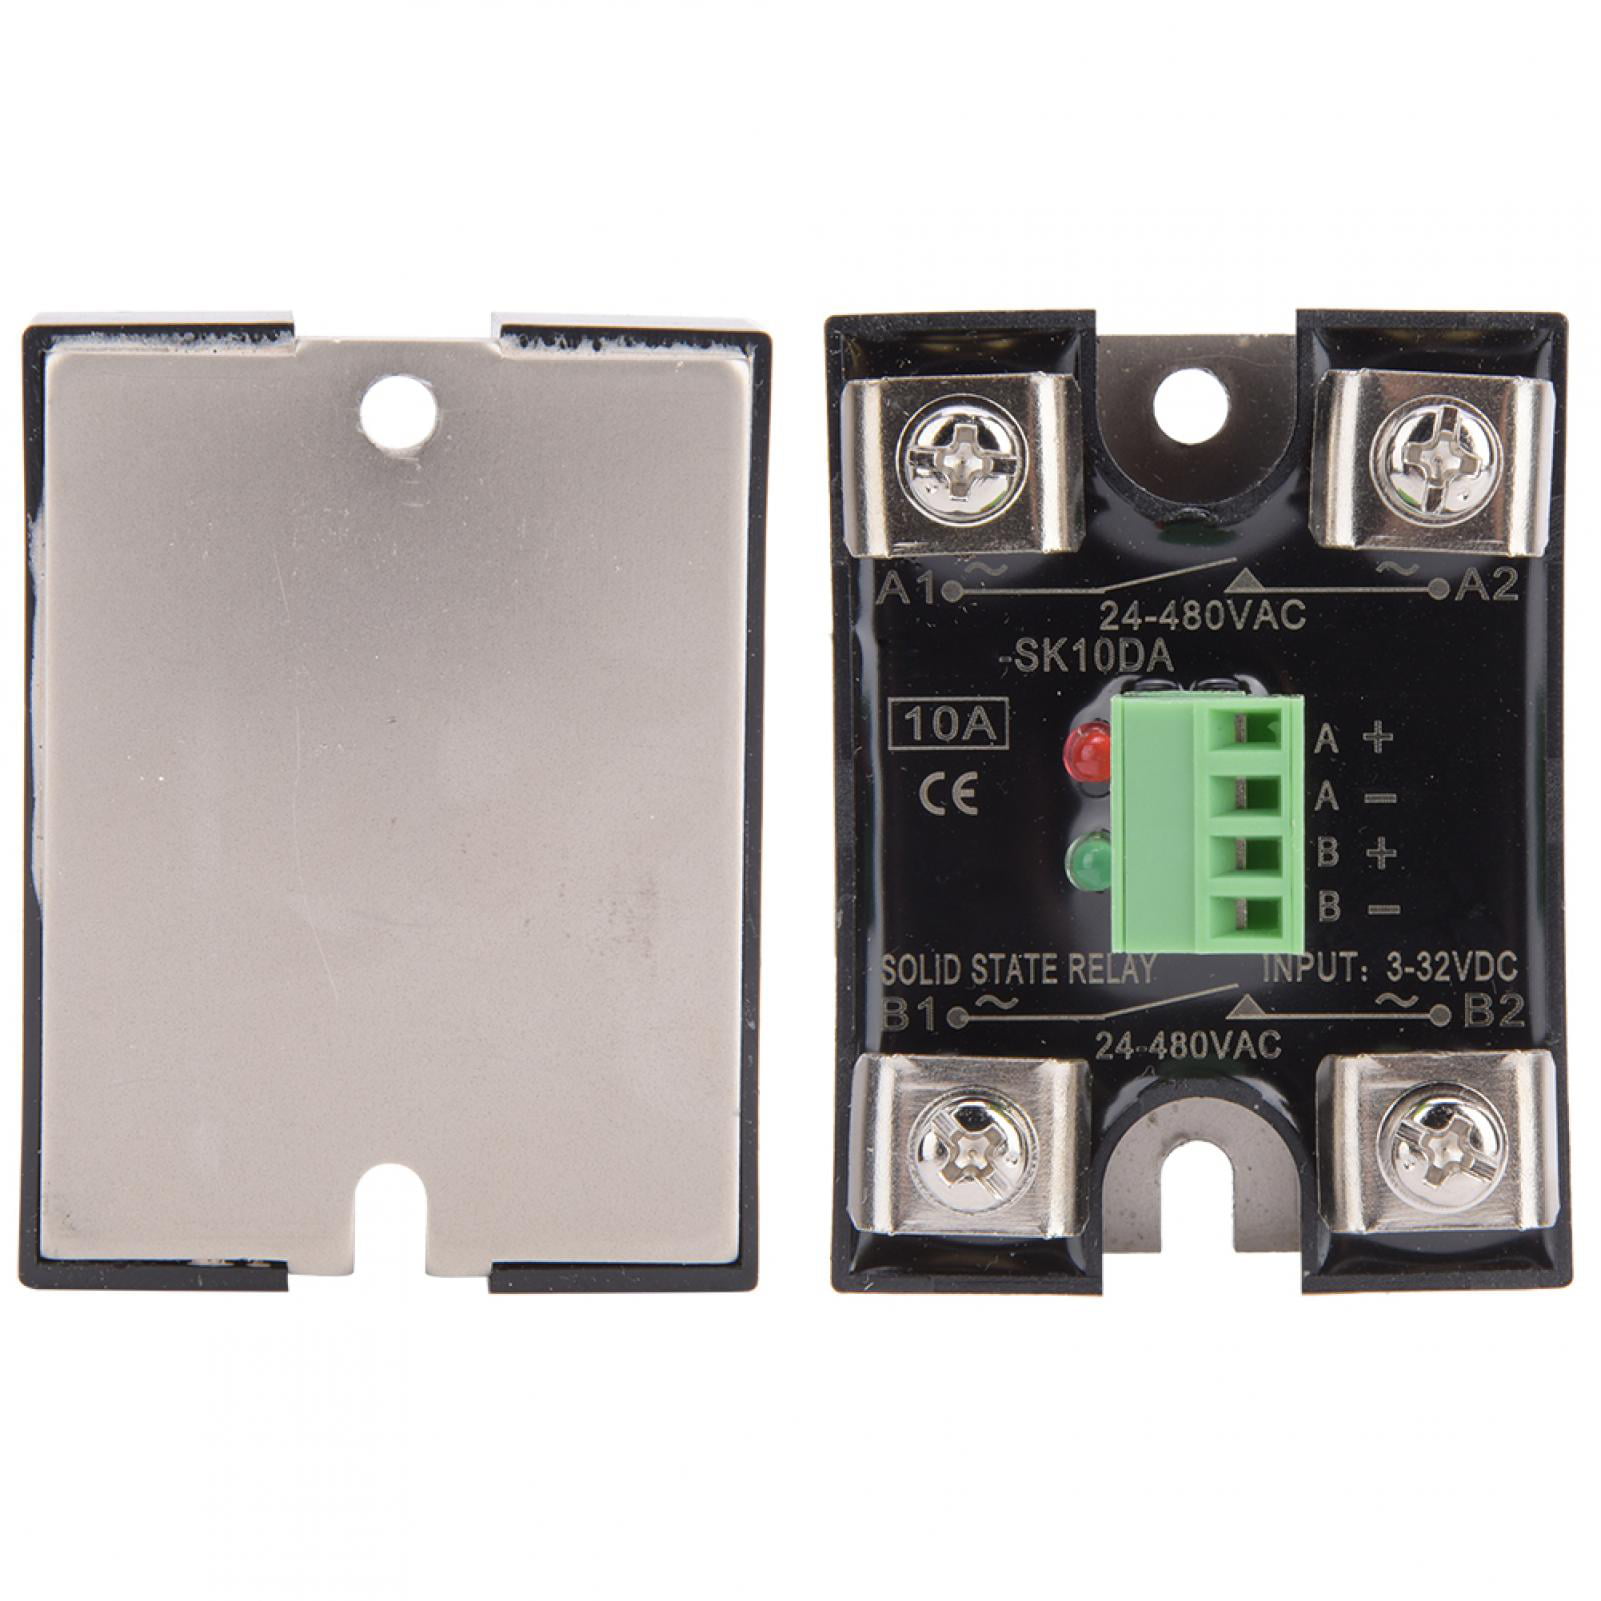 2PCS Single Phase Solid State Relay SSR Safety Cover Clear Plastic Covers la